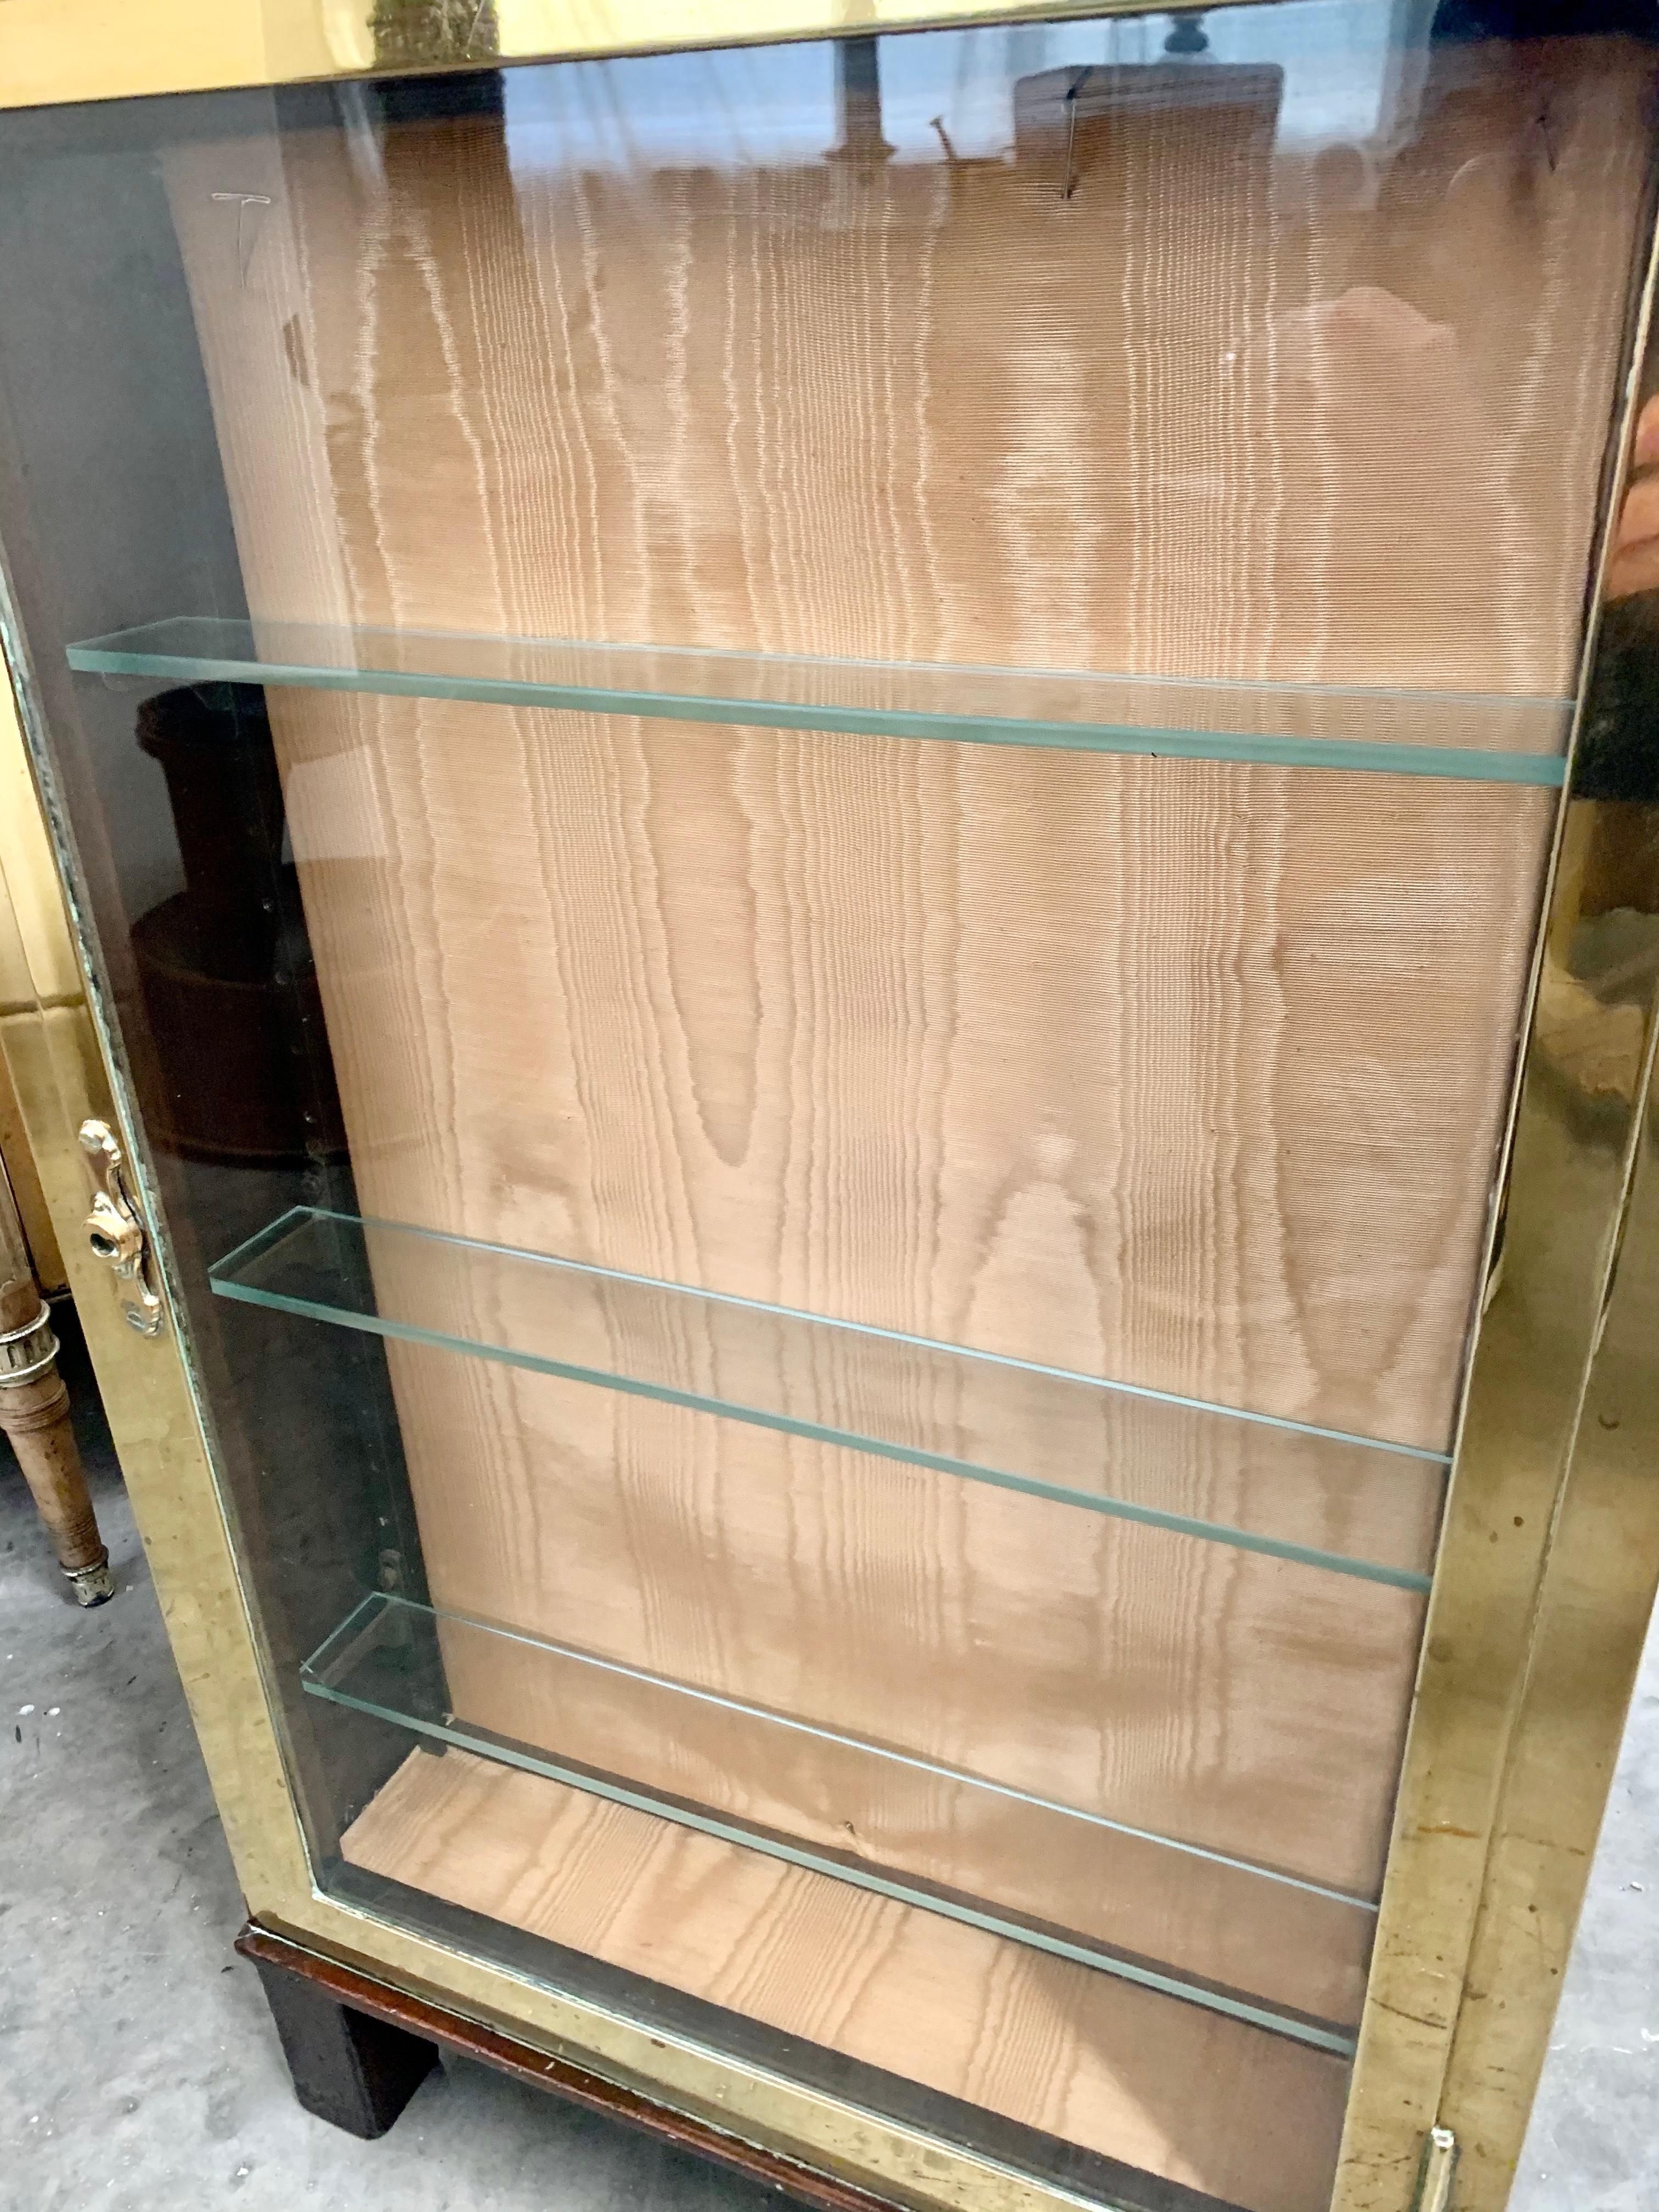 Collector's Mahogany Brass Bound Display Cabinet-England For Sale 1